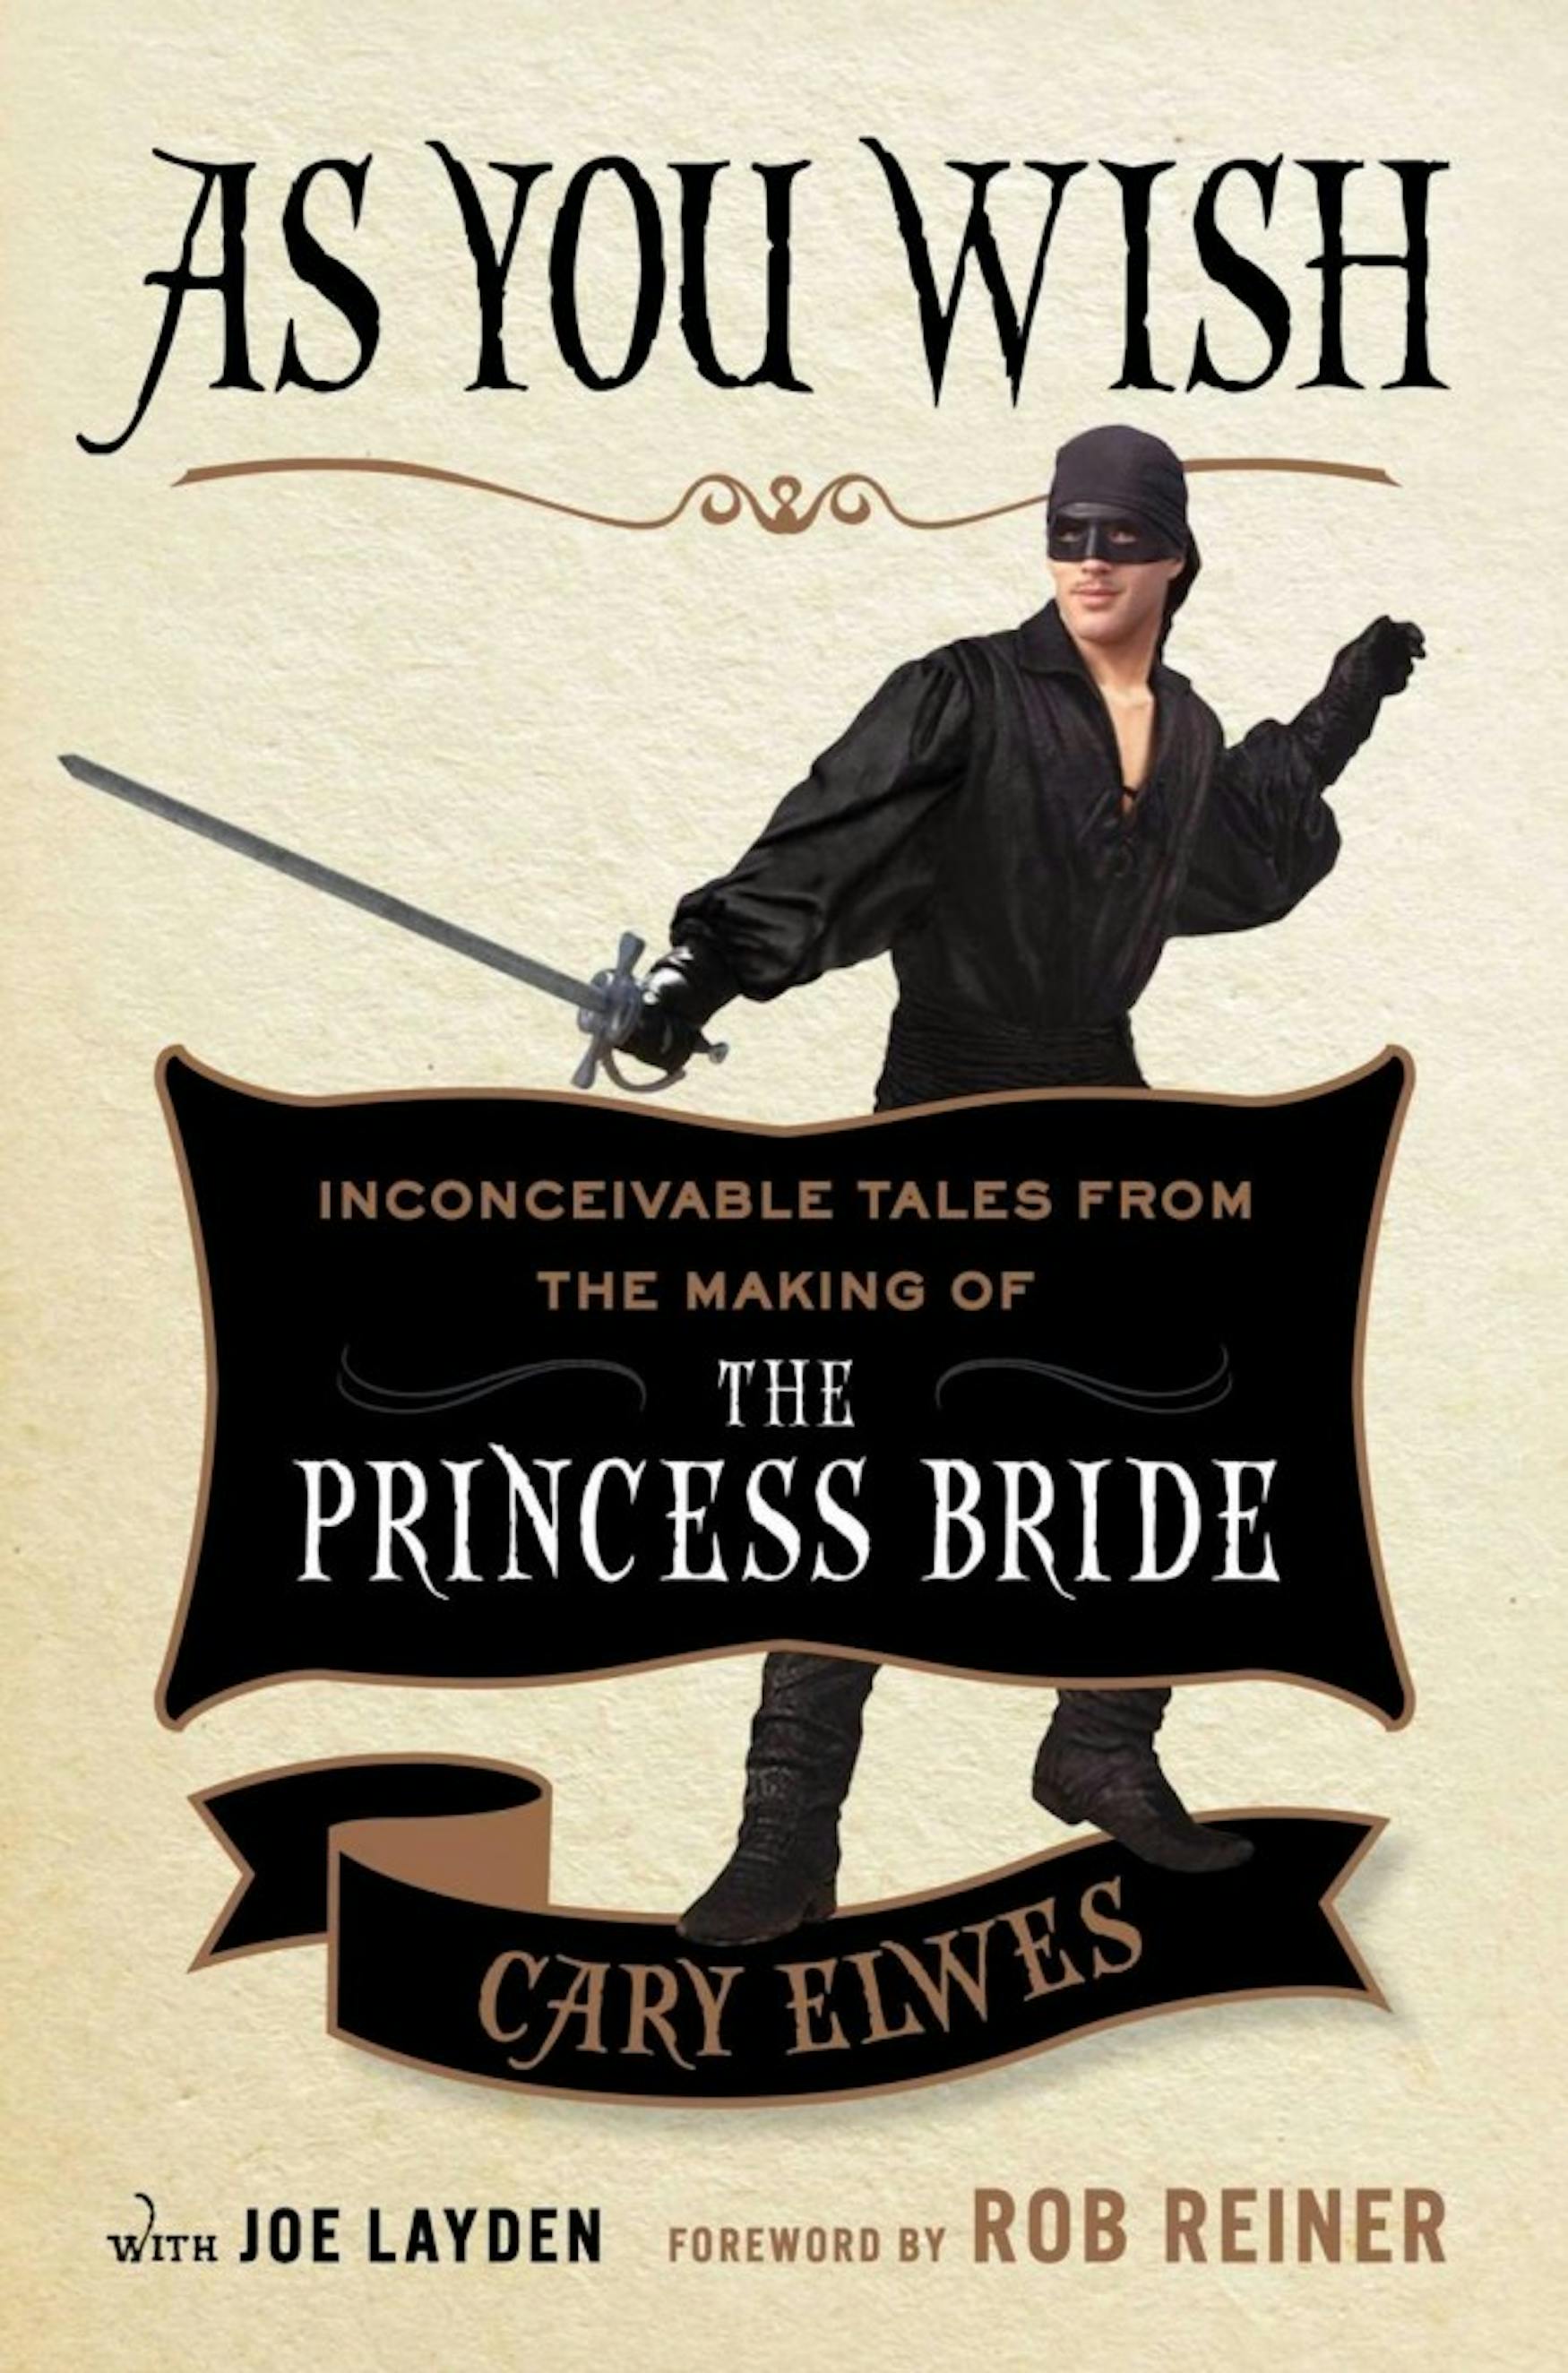 BEHIND THE SCENES: The new memoir As You Wish details the making of The Princess Bride.